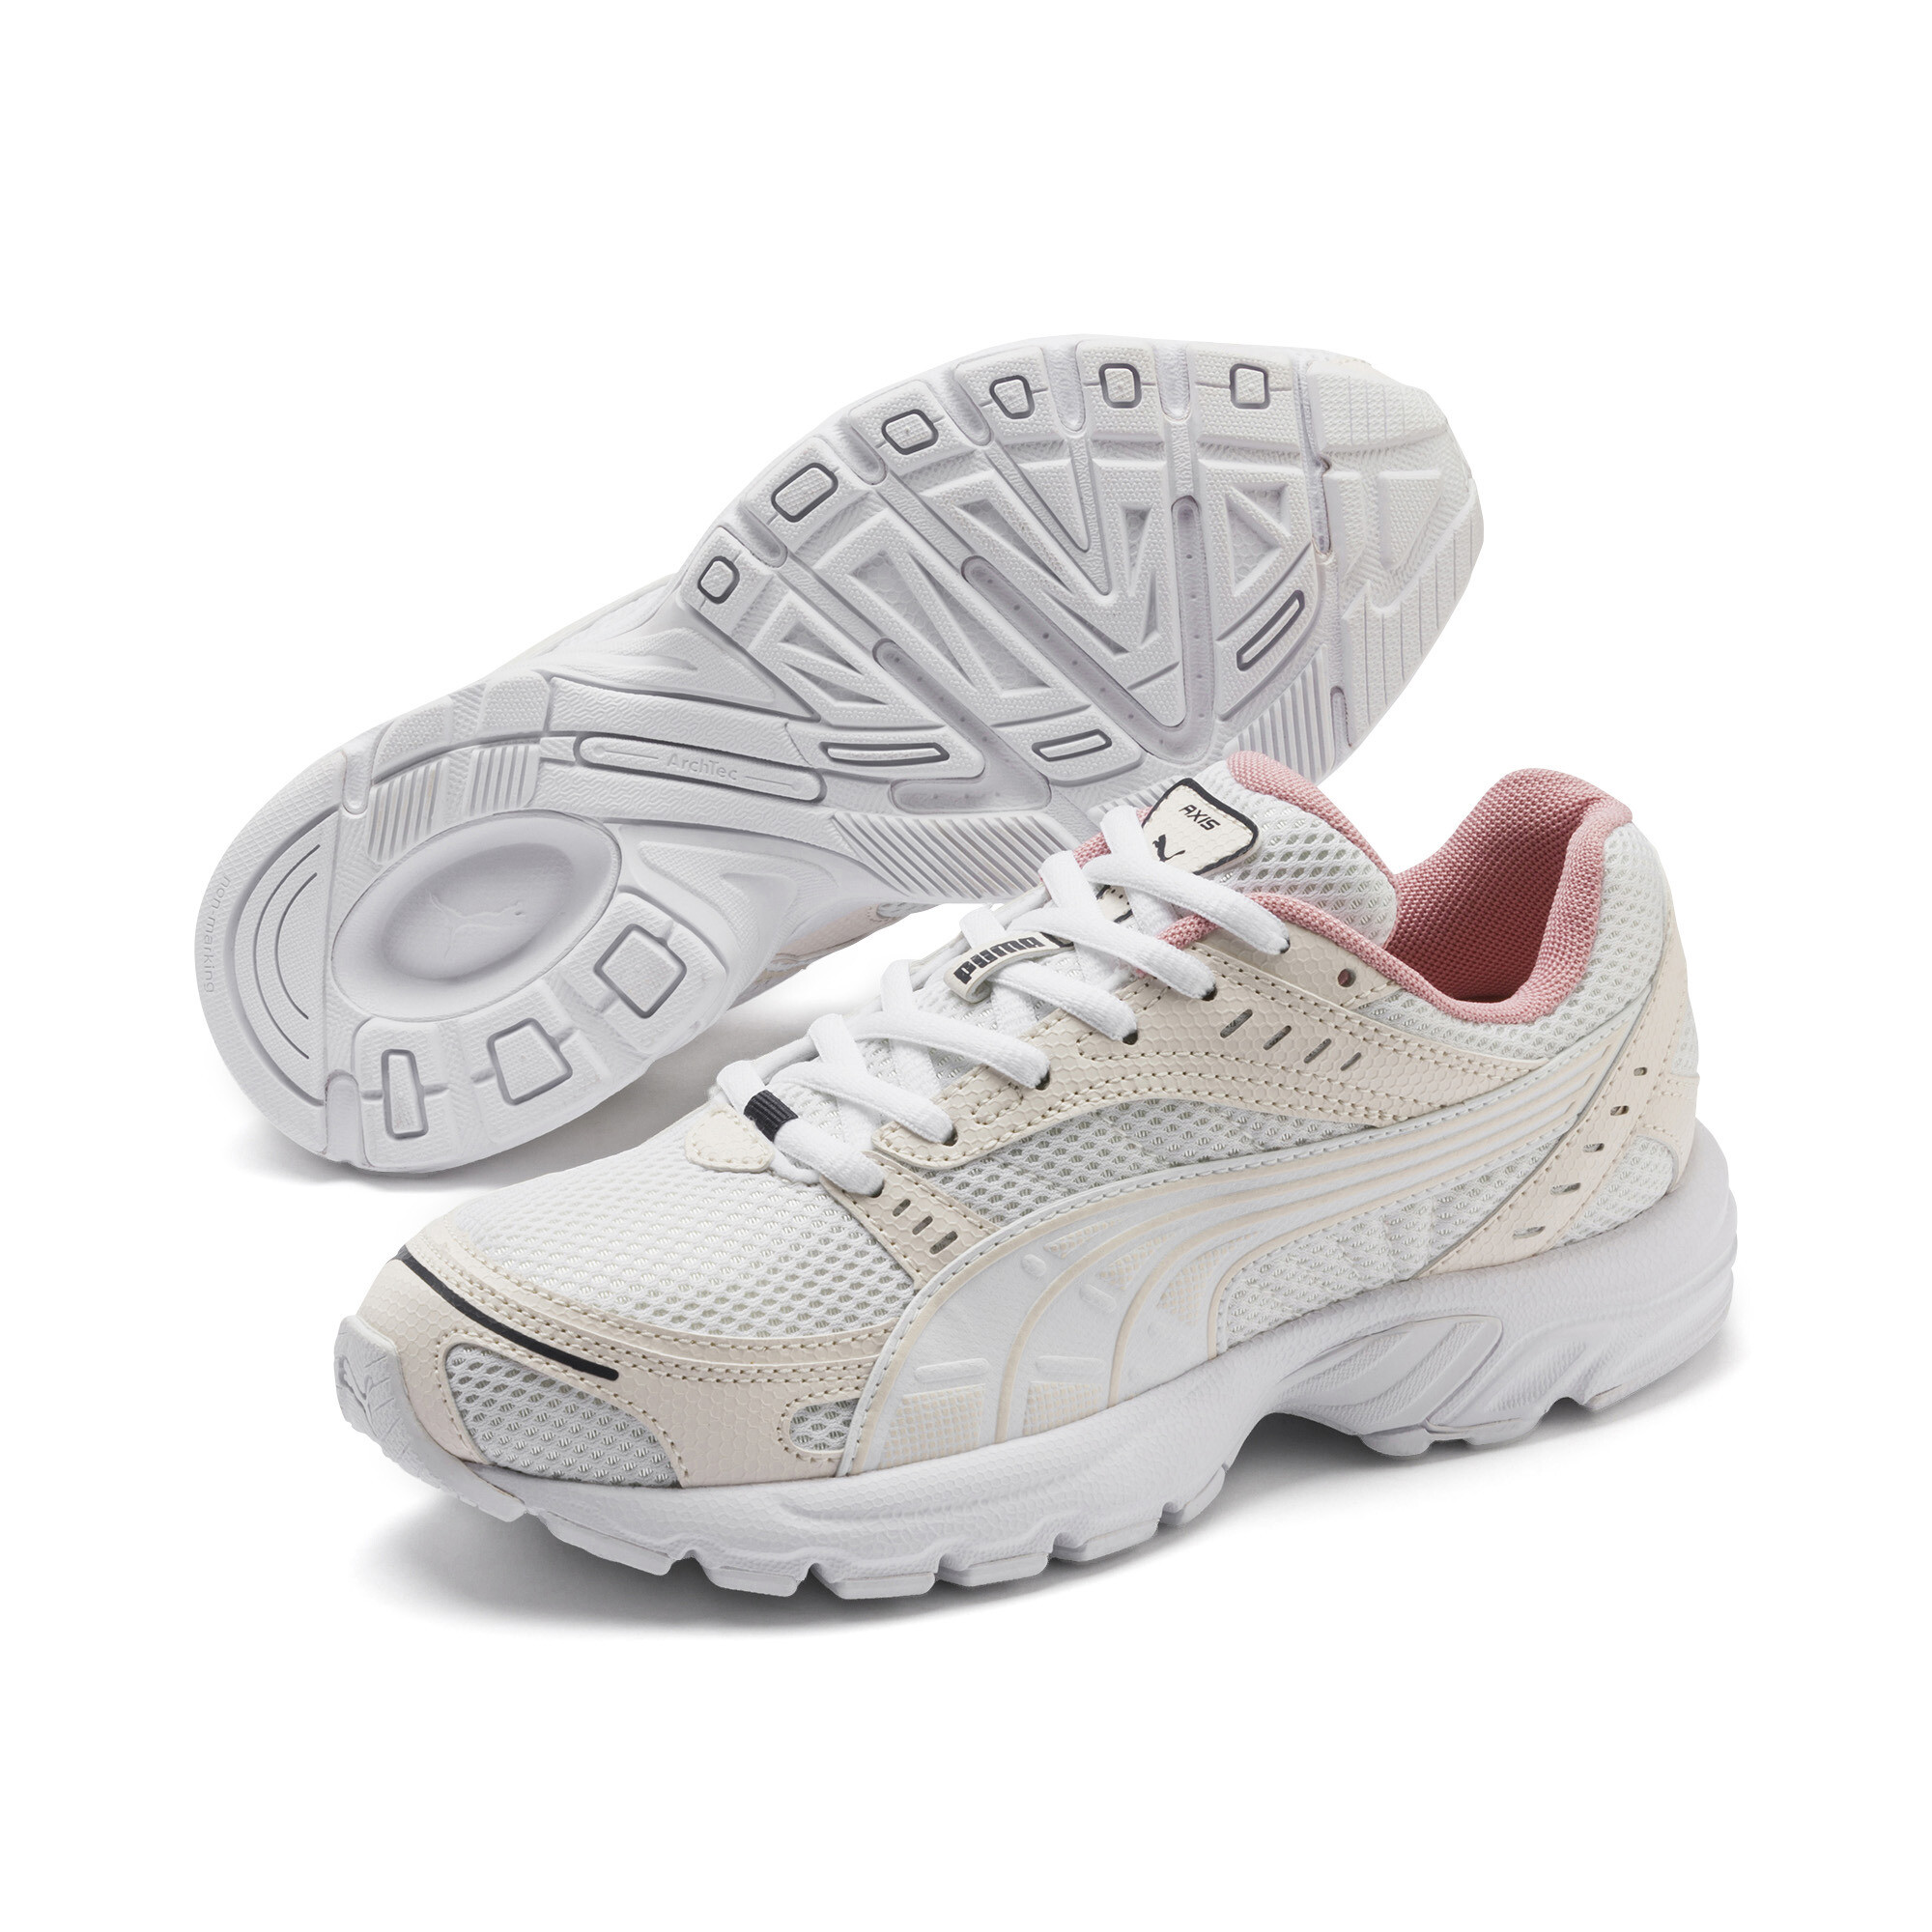 Puma Axis Trainers, White, Size 38.5, Shoes